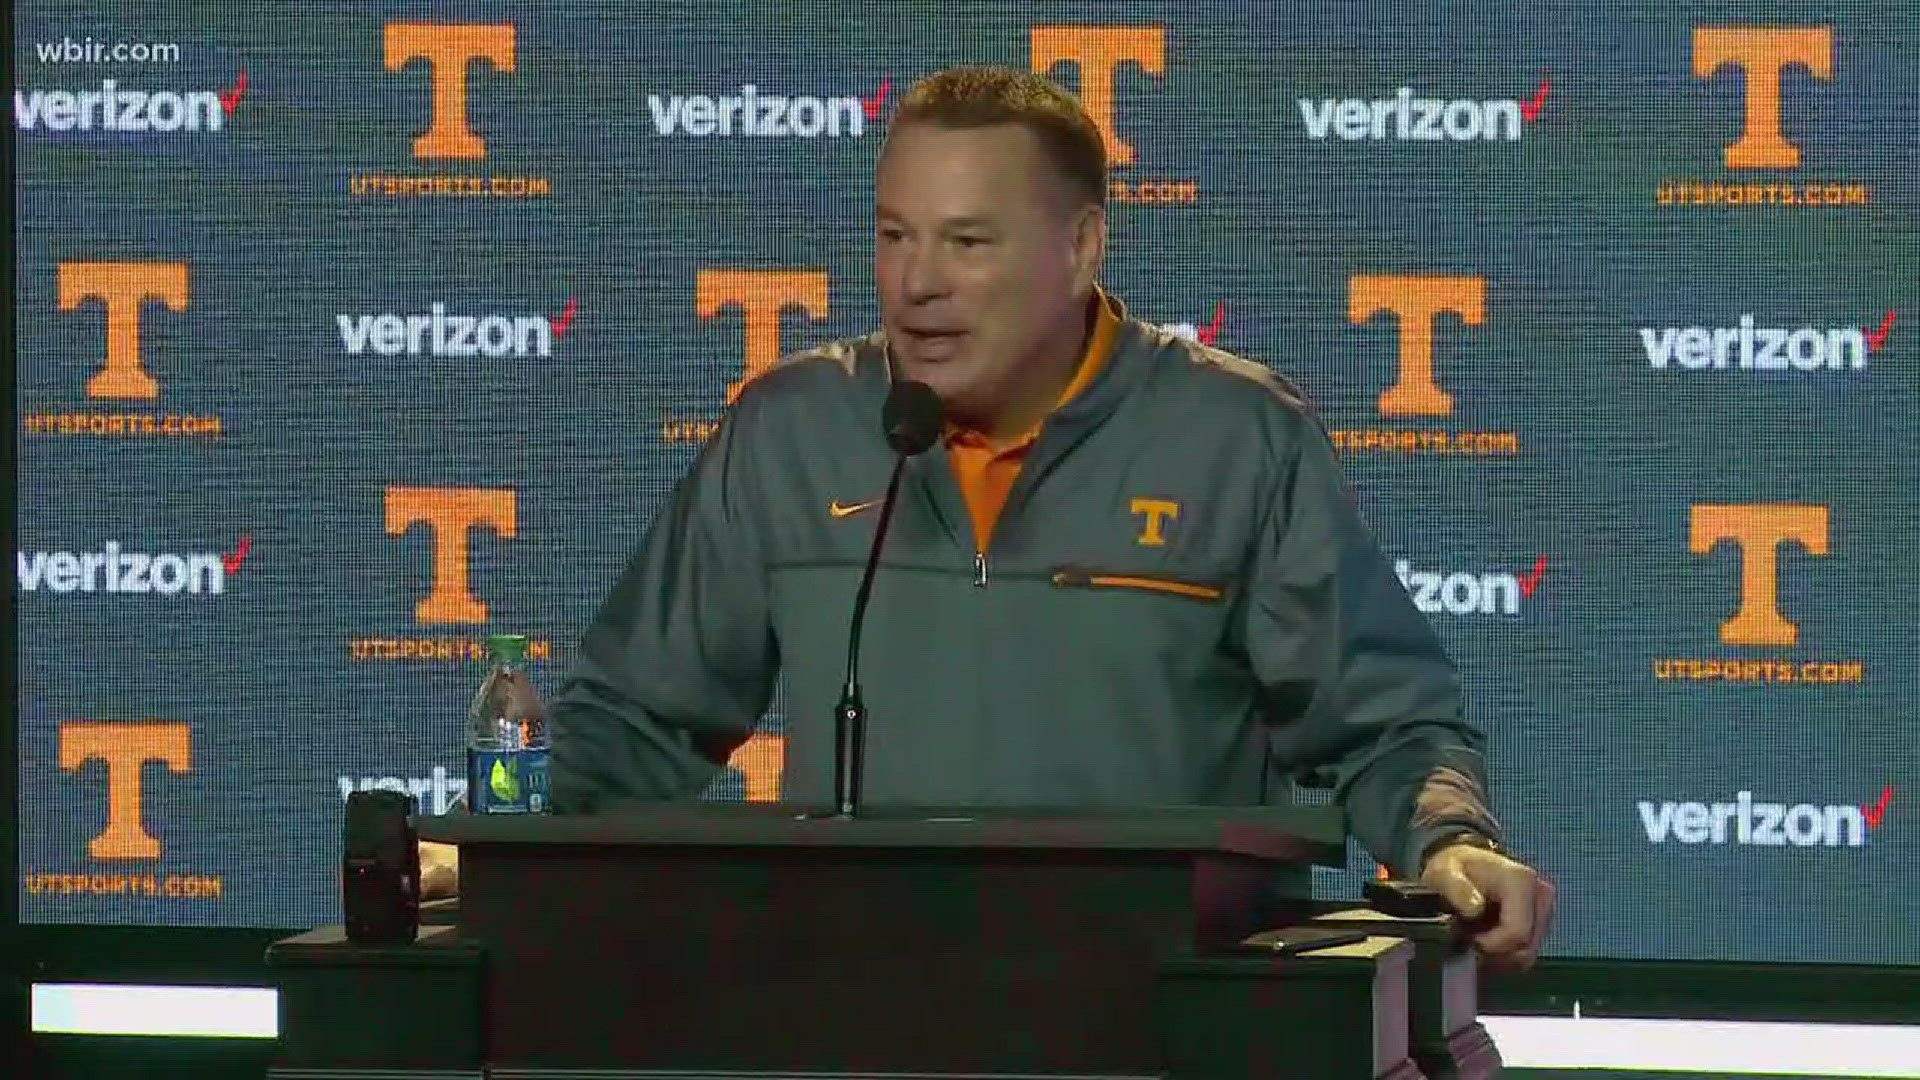 While many fans are ready for a coaching change, Butch Jones expects to be on the sideline for the Homecoming game and says he still feels supported by the administration